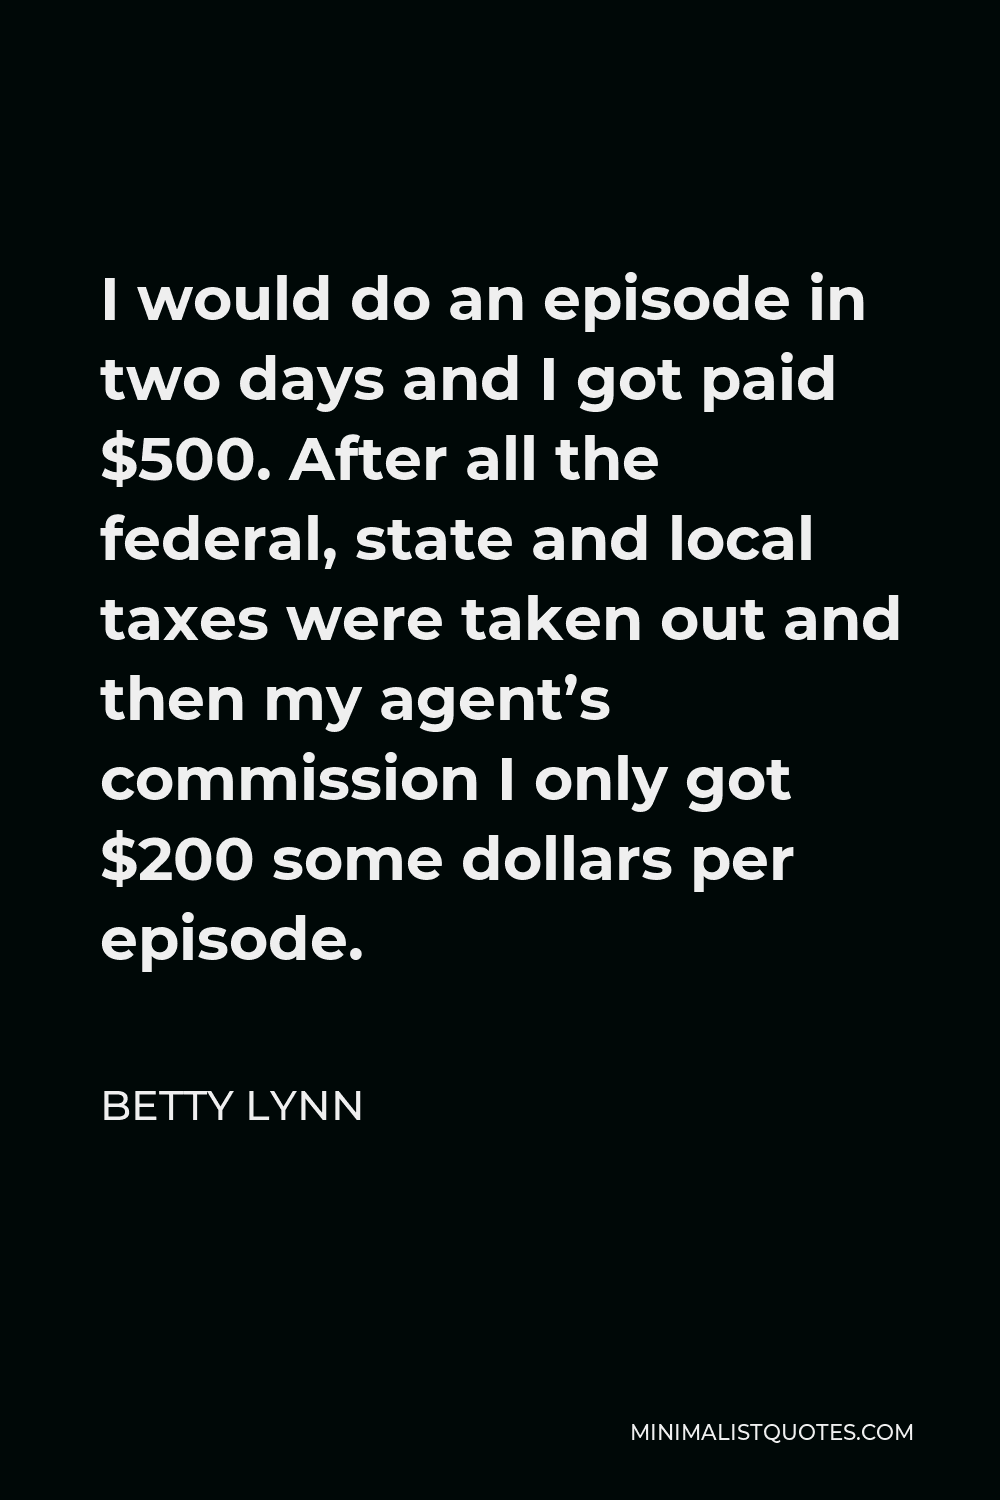 Betty Lynn Quote - I would do an episode in two days and I got paid $500. After all the federal, state and local taxes were taken out and then my agent’s commission I only got $200 some dollars per episode.